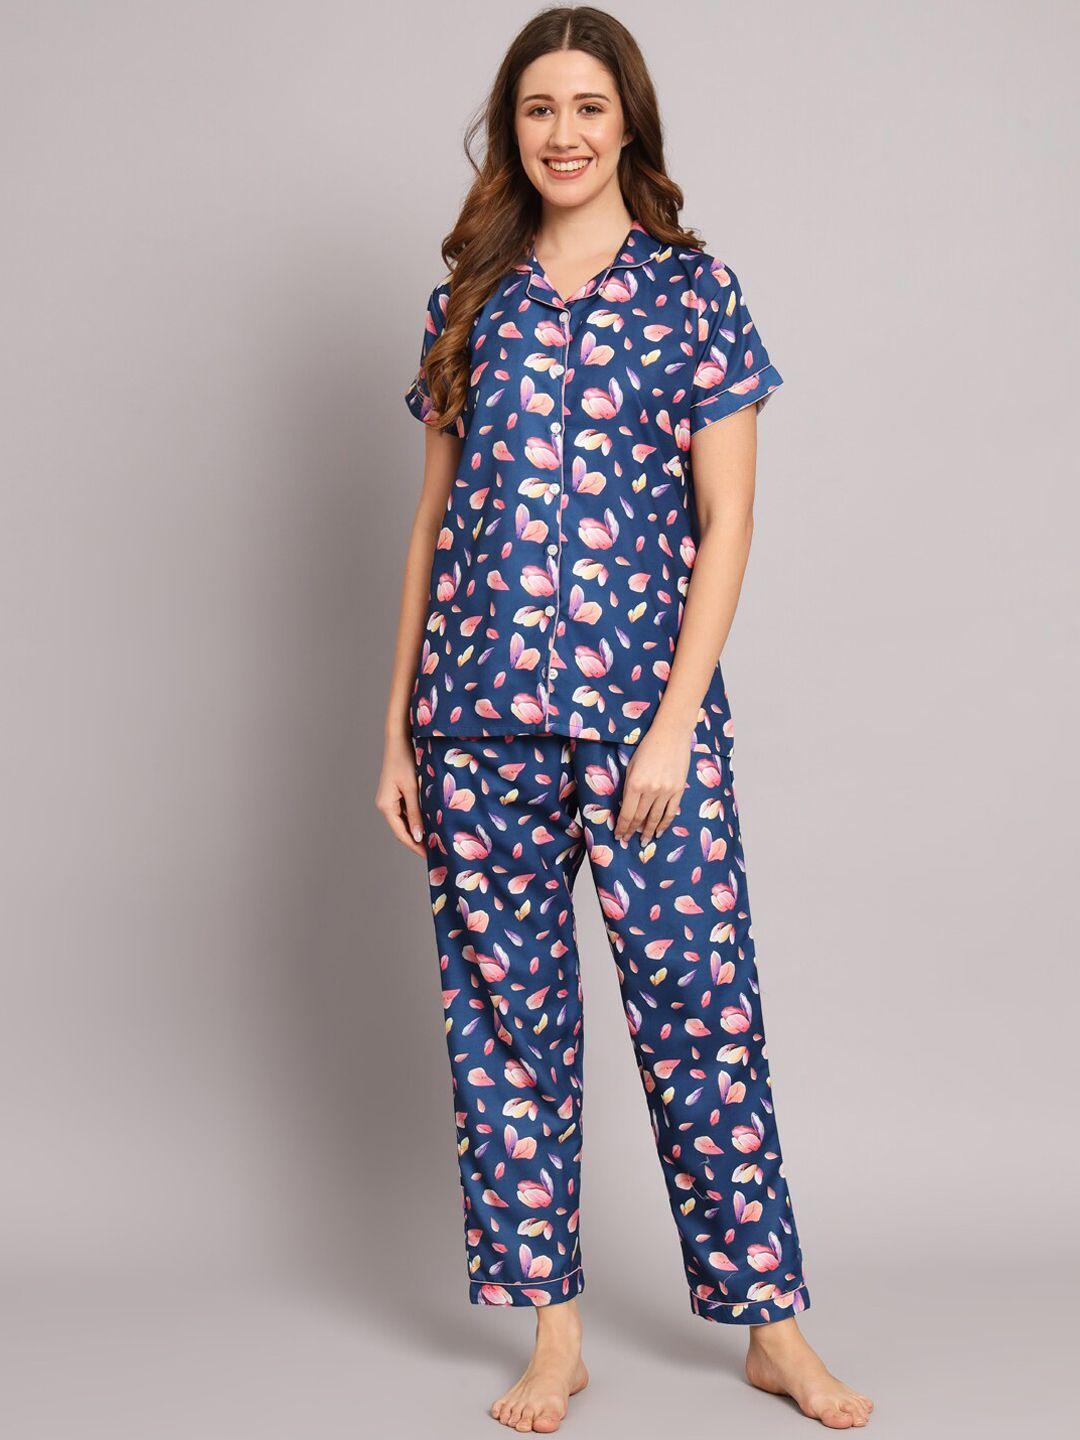 sephani floral printed night suit